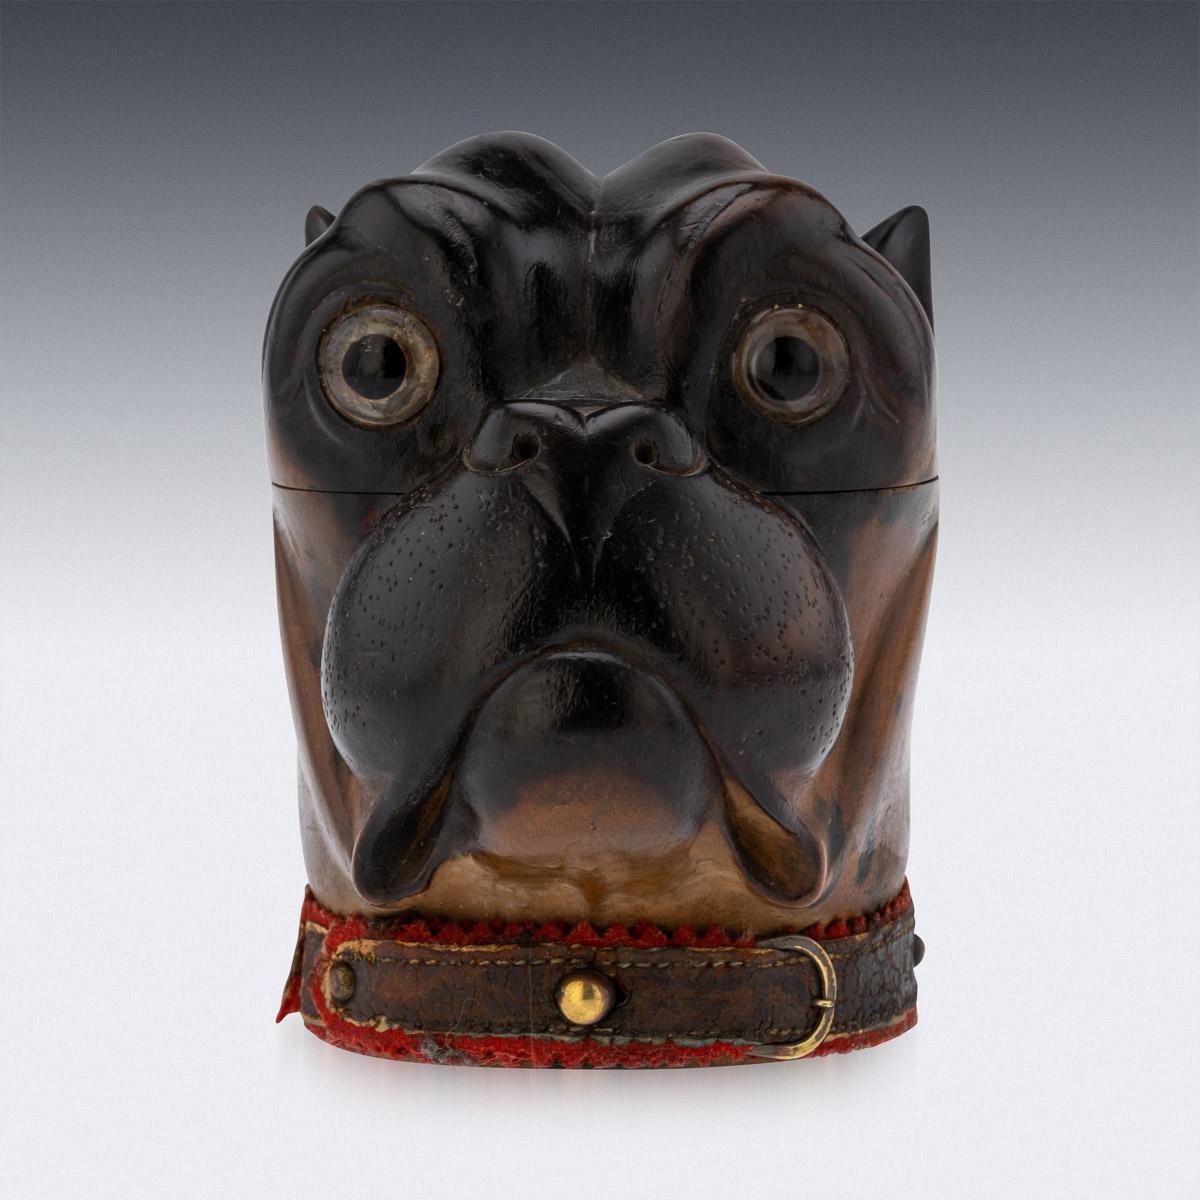 19th century Victorian lignum vitae inkwell modelled as the head of a bulldog with realistic glass inset eyes, original leather collar with a copper push-button and a silver presentation plaque to the back (In French) 'A ME E.DE LACROUSILLE,